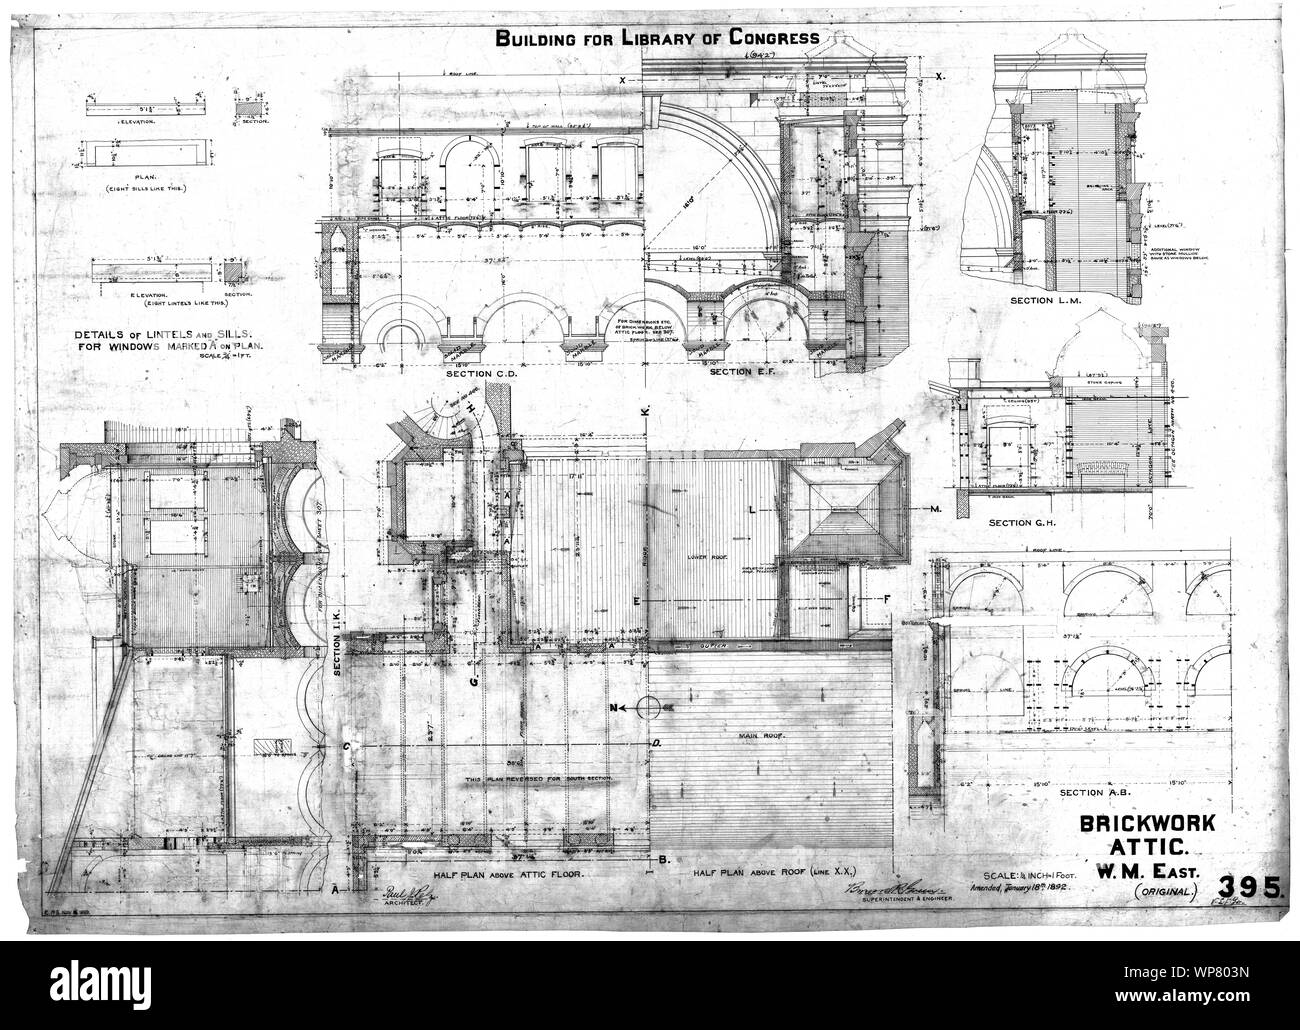 Library of Congress (Washington, D.C.). Attic. Brickwork. Plans, sections, and elevations. Working drawing] / Paul F. Pelz, architect Stock Photo